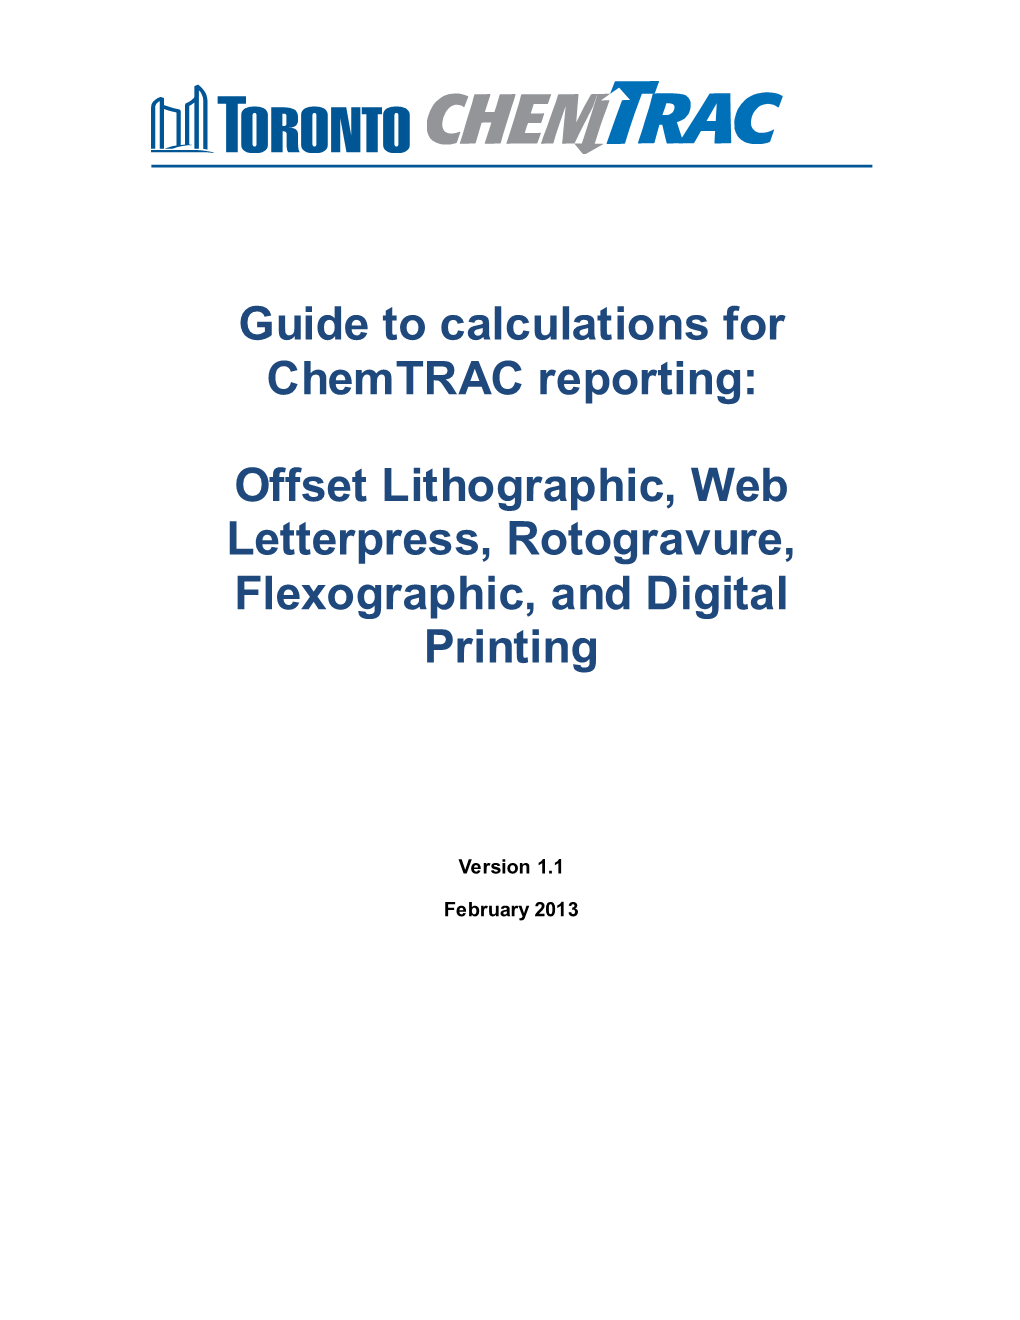 Guide to Calculations for Chemtrac Reporting: Offset Lithographic, Web